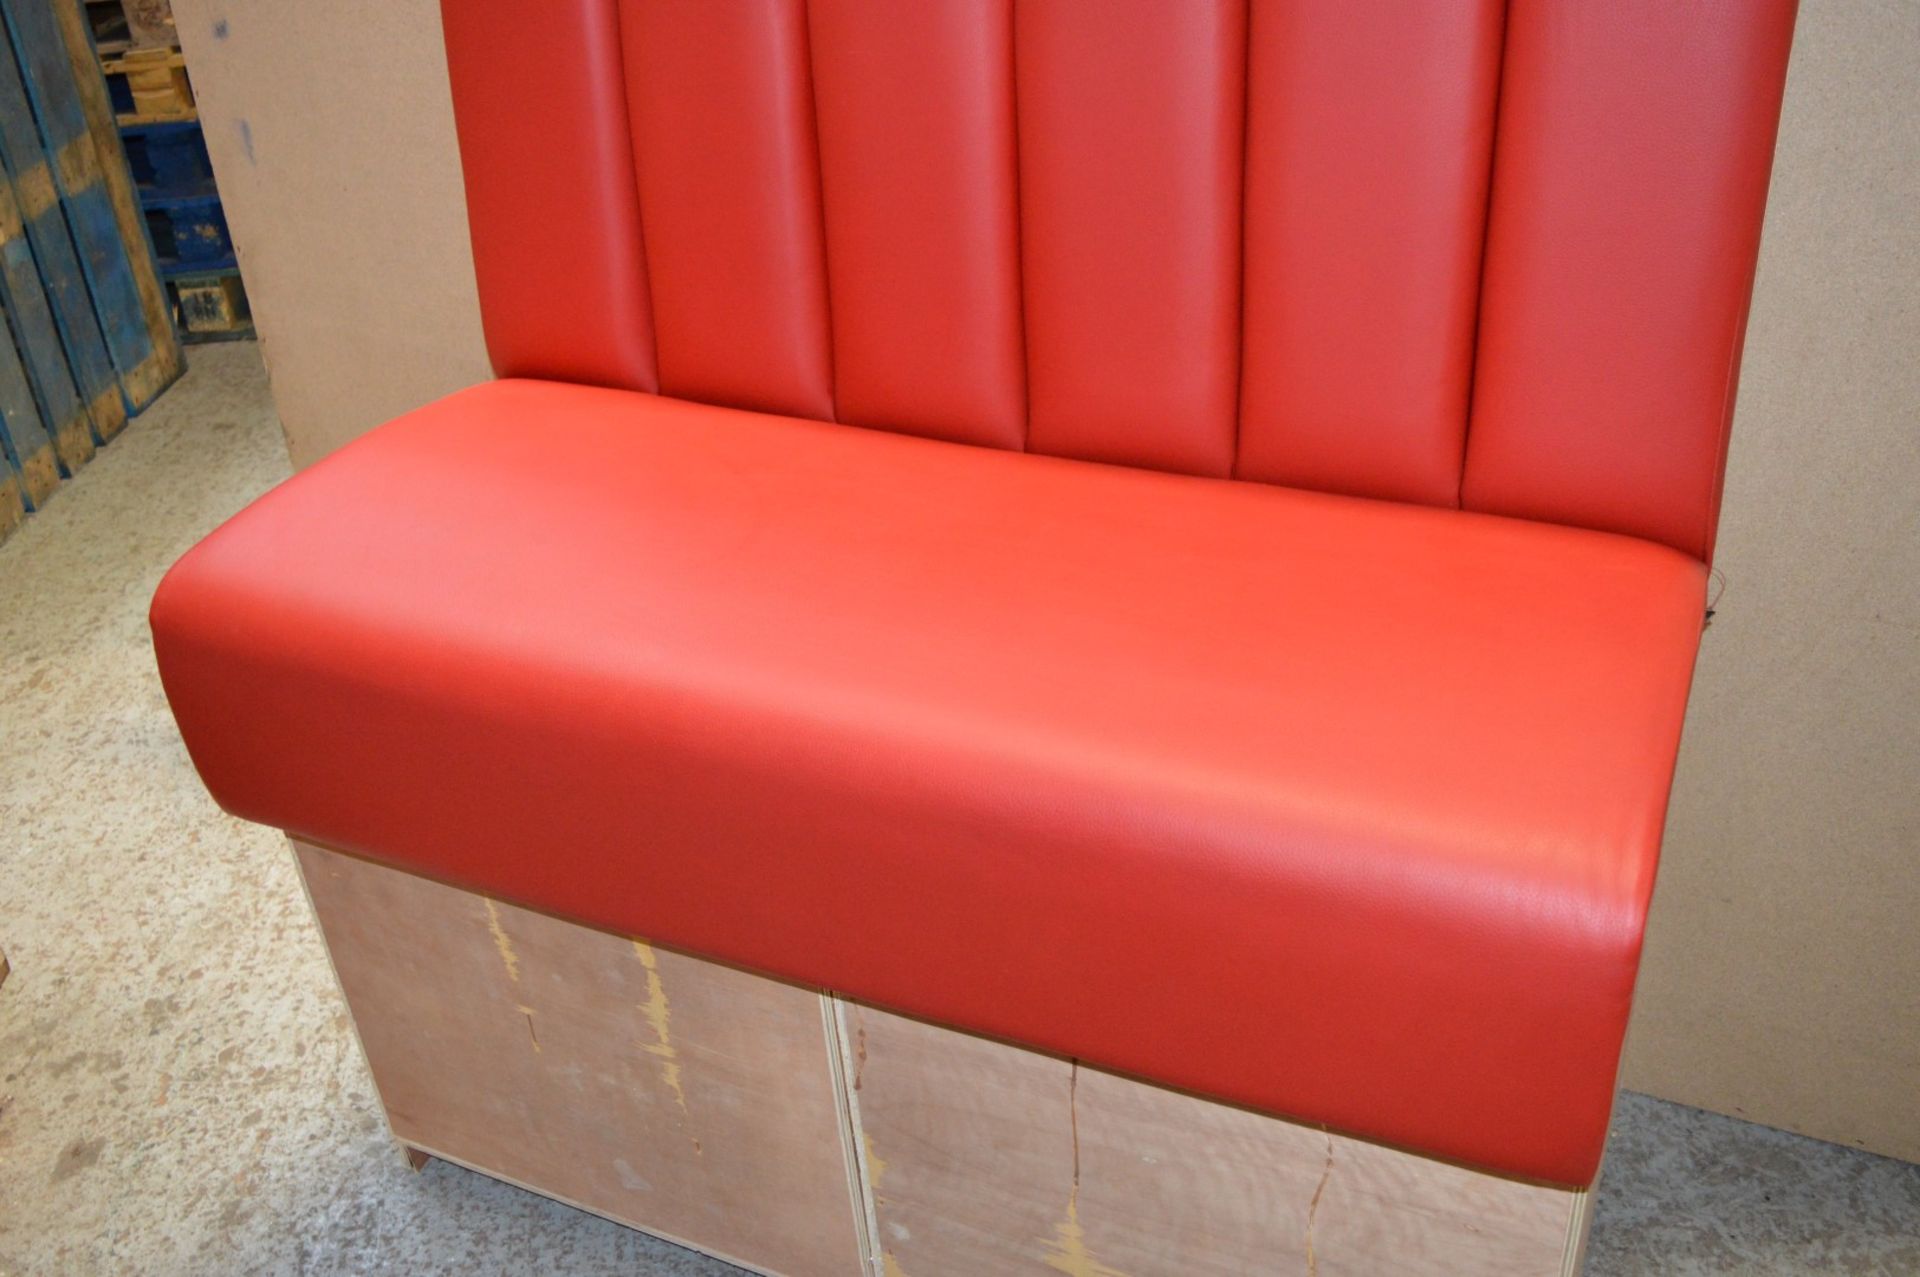 1 x High Seat Single Seating Bench Upholstered in Red Leather - Sits upto Two People - High - Image 10 of 16